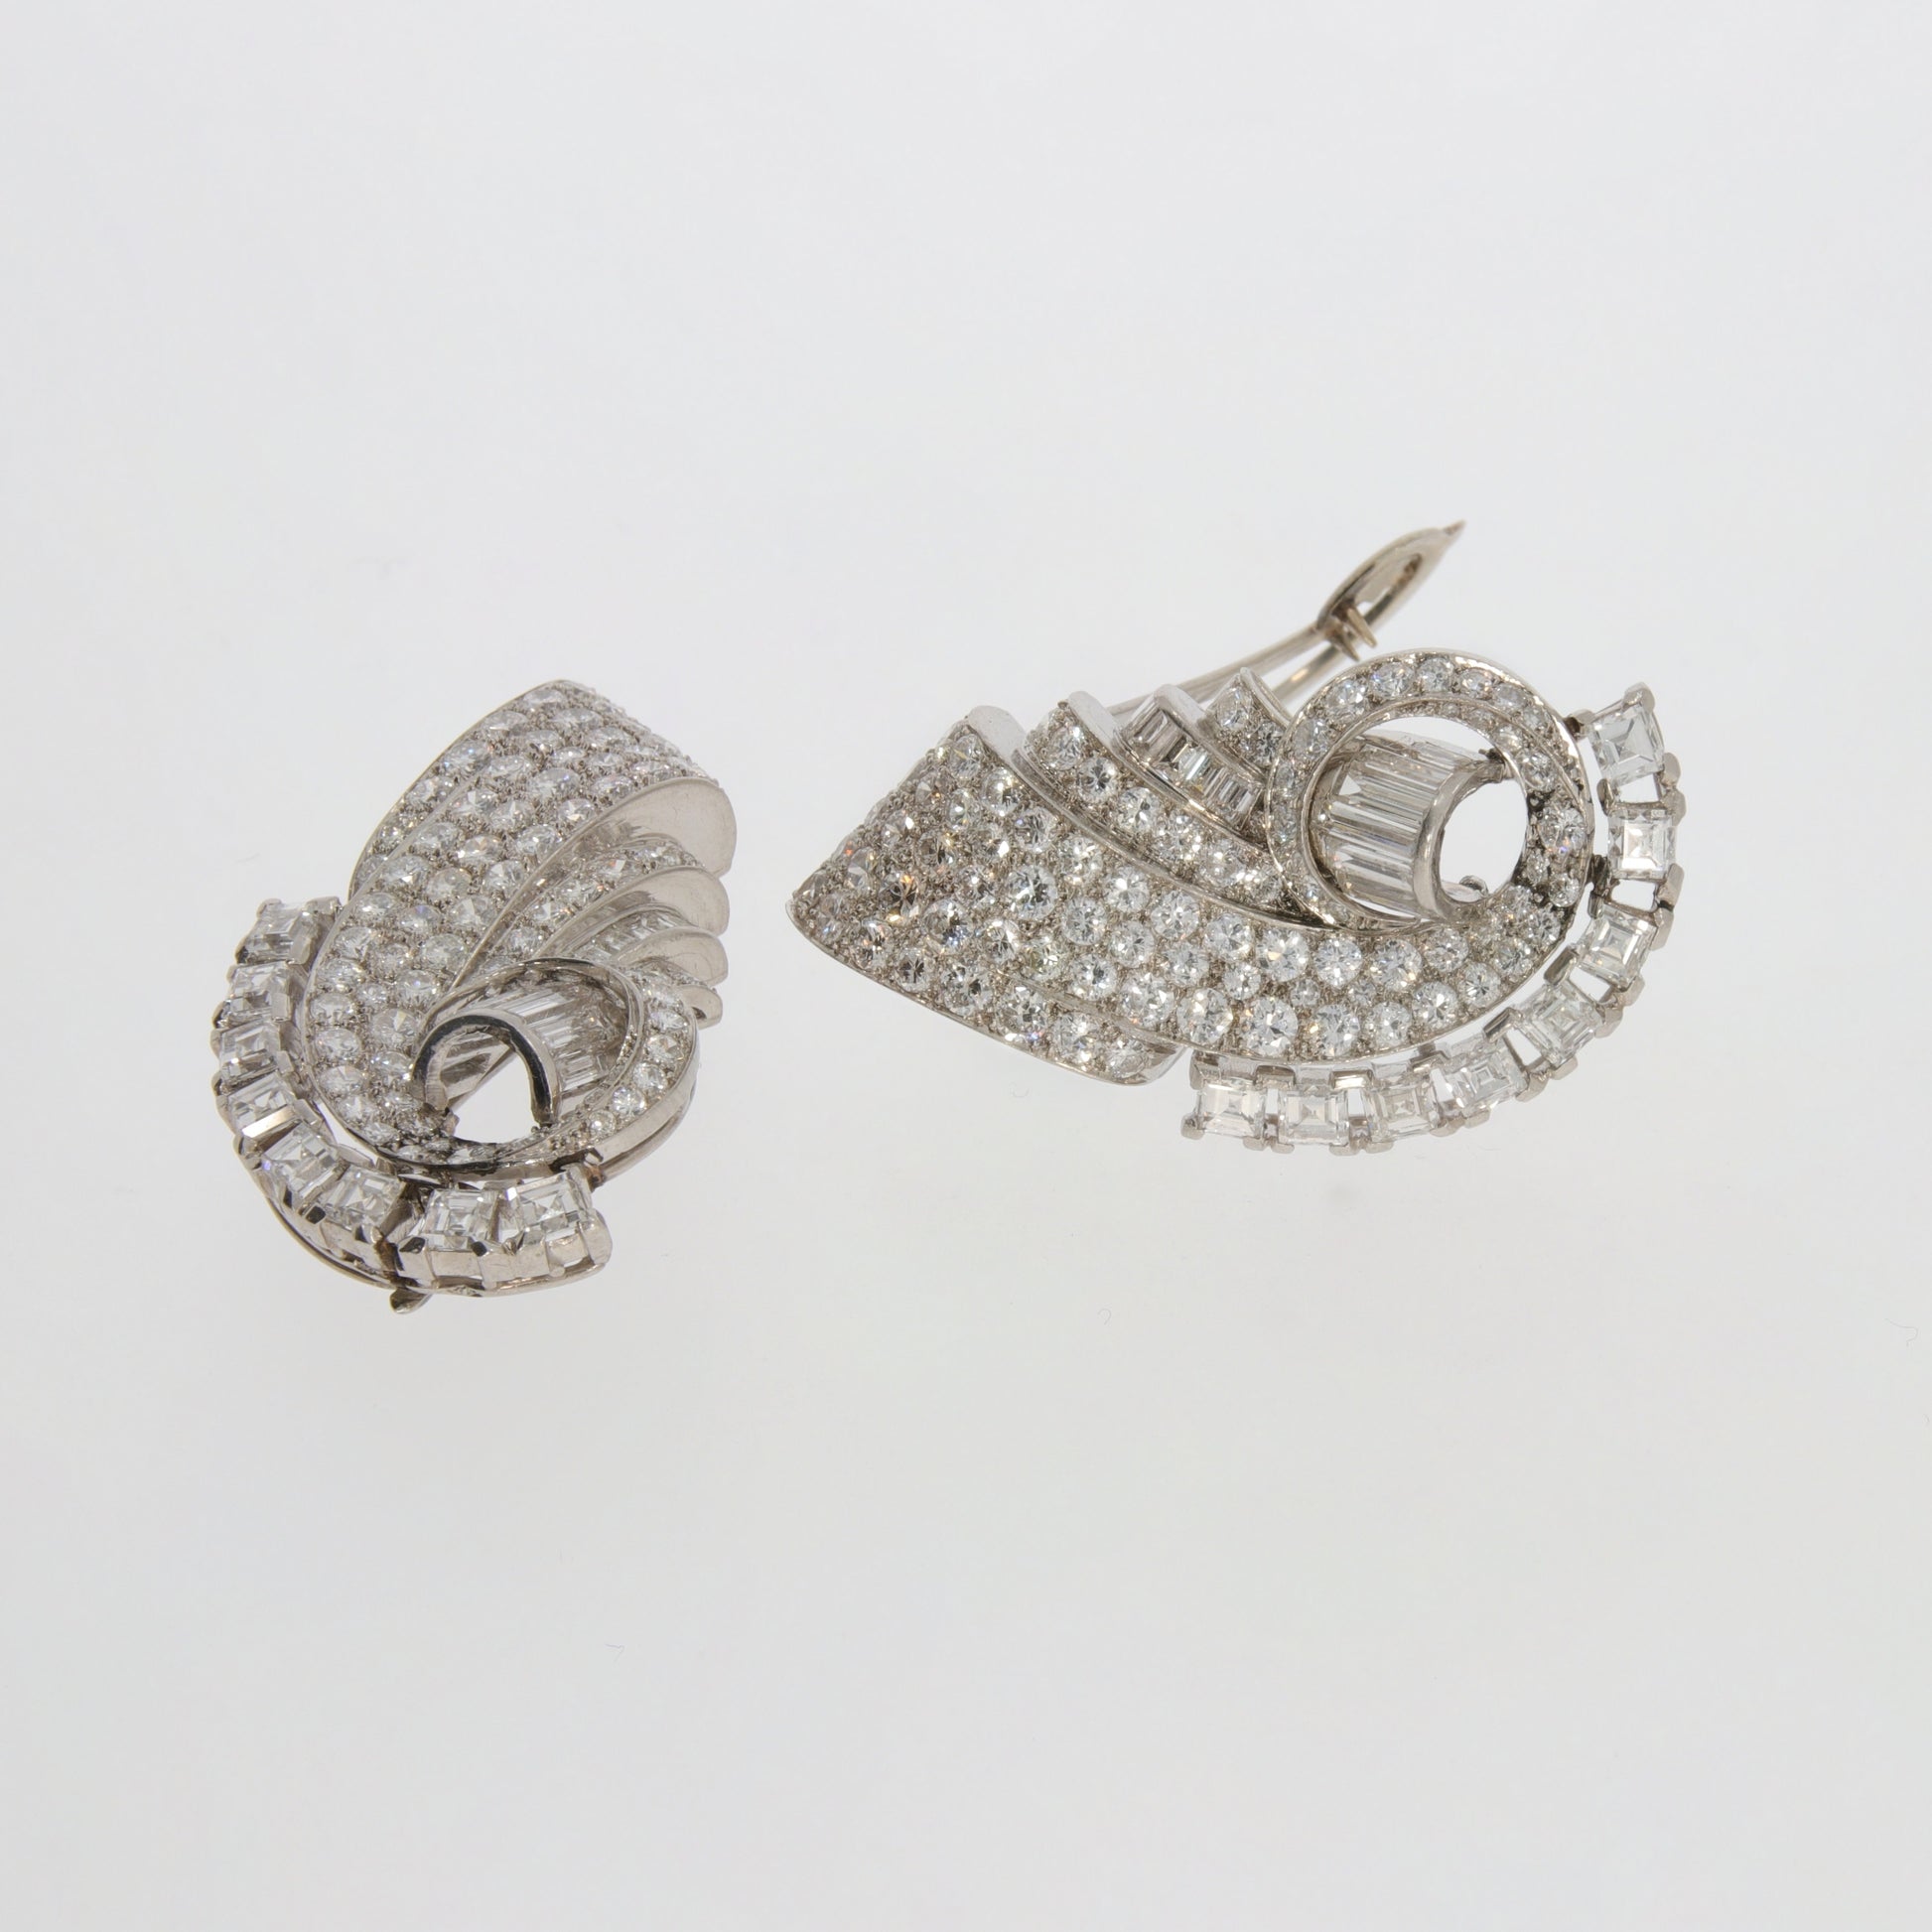 French 1940s Platinum Diamond Dress Clips side and bottom